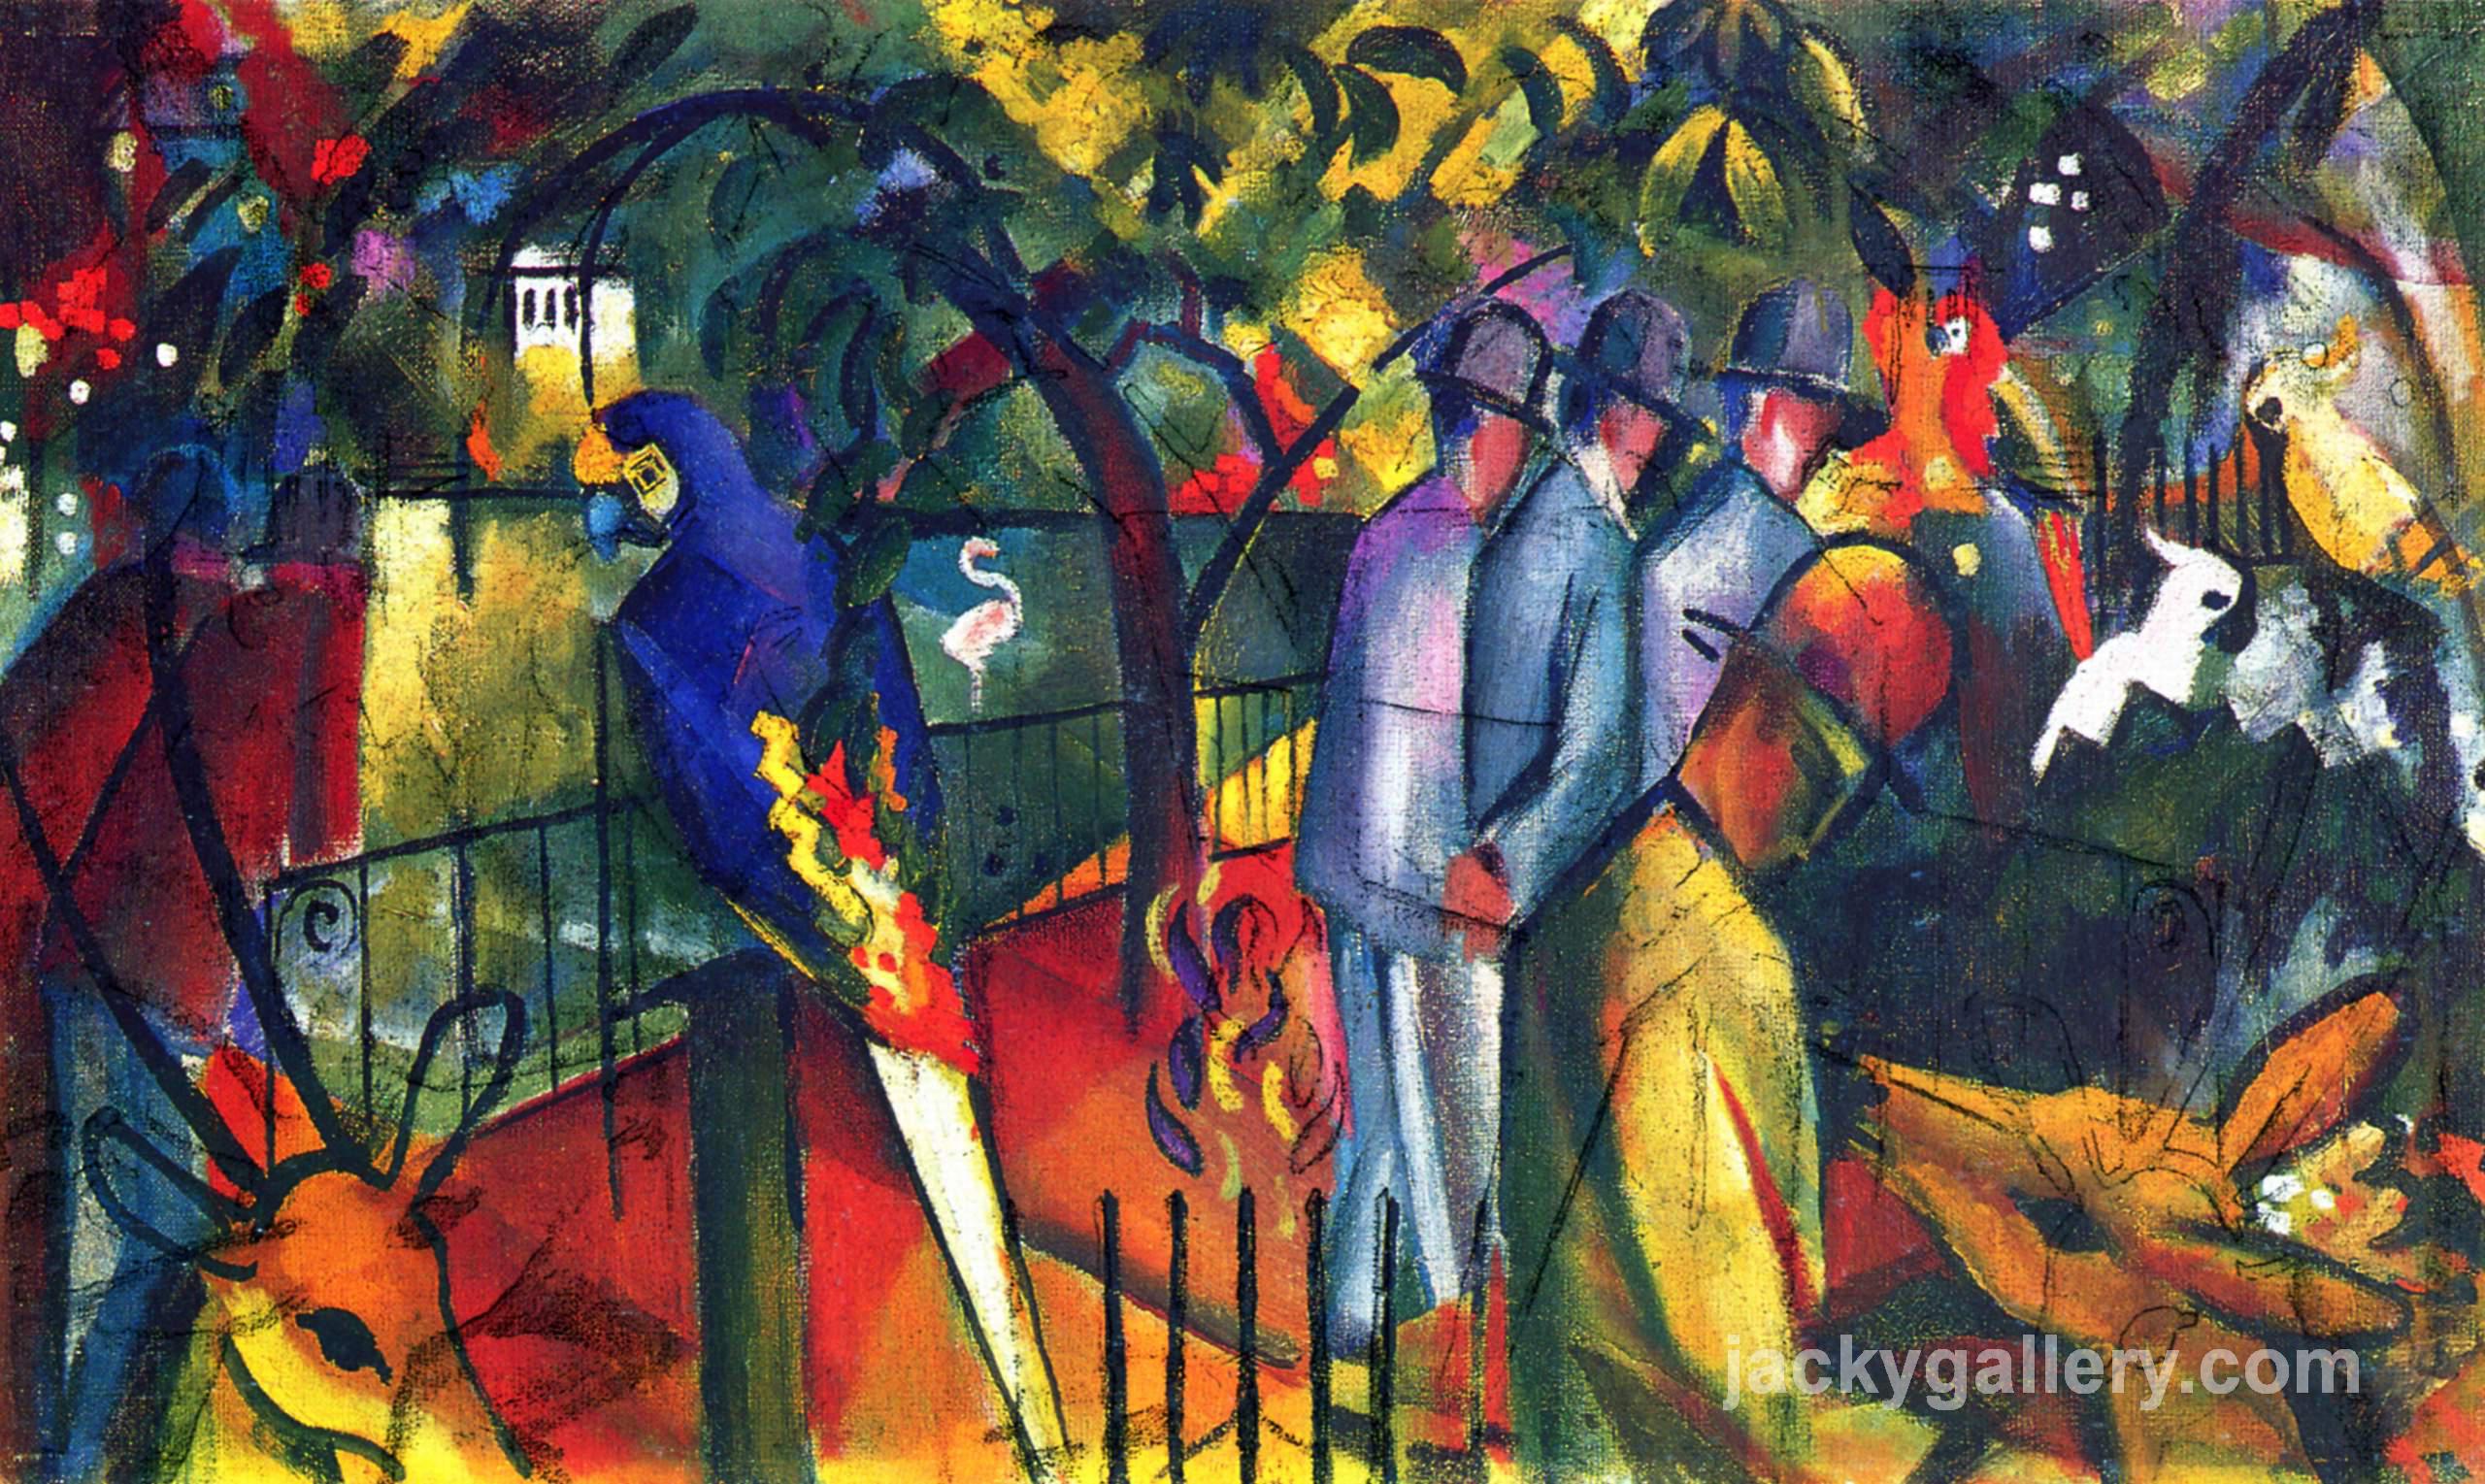 Zoological Garden I, August Macke painting